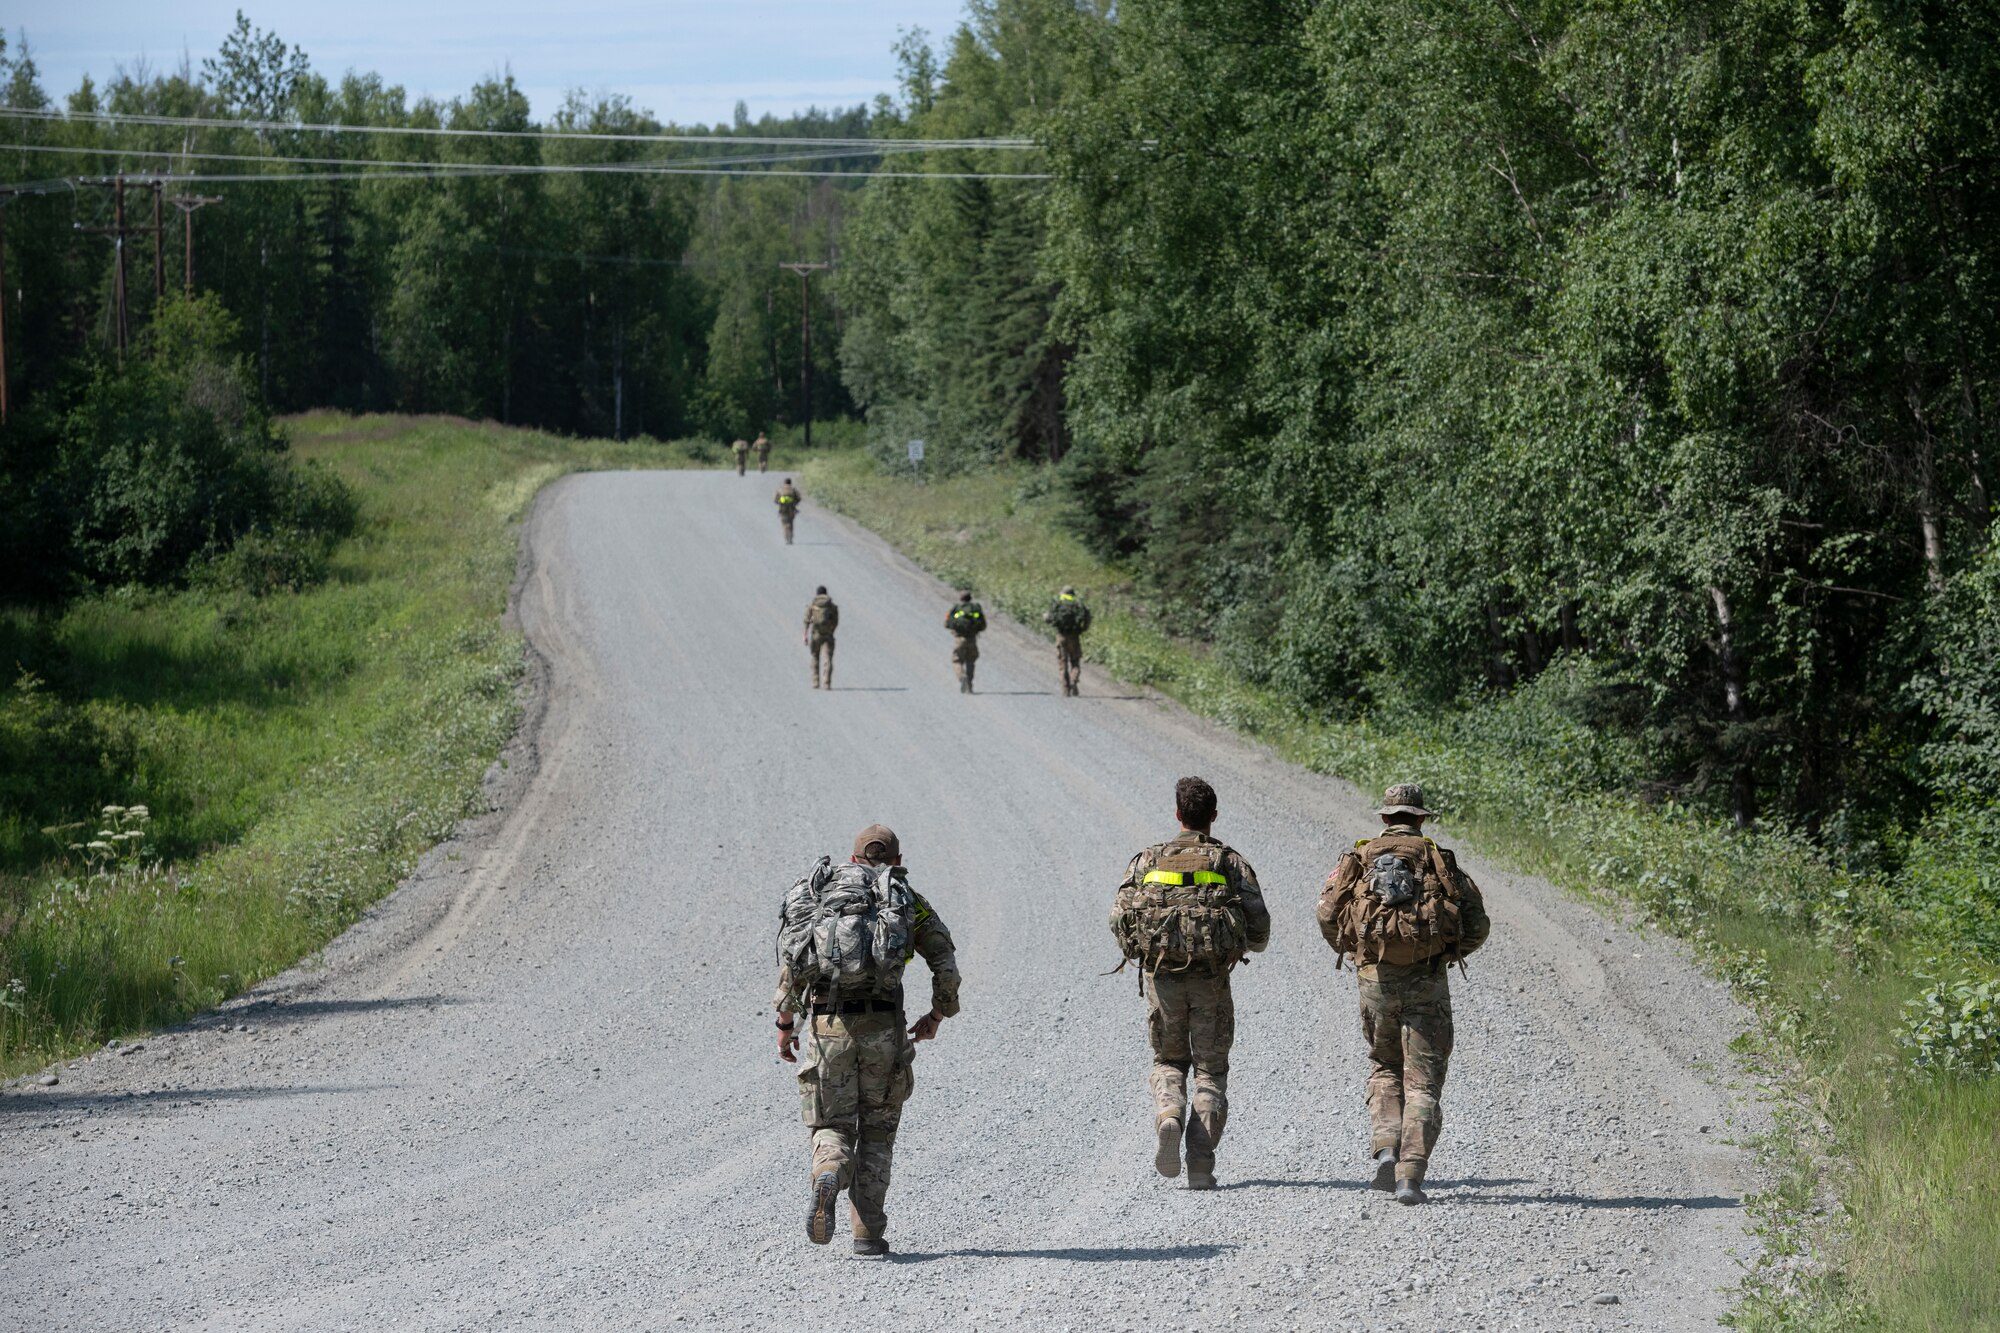 U.S. Air Force tactical air control party (TACP) specialists from the 1st Air Support Operations Group compete in a ruck run during the Chaos Challenge 2021 at Joint Base Elmendorf-Richardson, Alaska, July 14, 2021. The Chaos Challenge 2021 was a multi-day series of mental and physical contests sponsored by the 1st Air Support Operations Group with participants from the 3rd, 5th, 25th, and 604th Air Support Operations Squadrons and a guest team from the 673d Security Forces Squadron. The winner of the competition will go on to compete in Lightning Challenge 2021 to determine the best two-man TACP team in the Air Force.